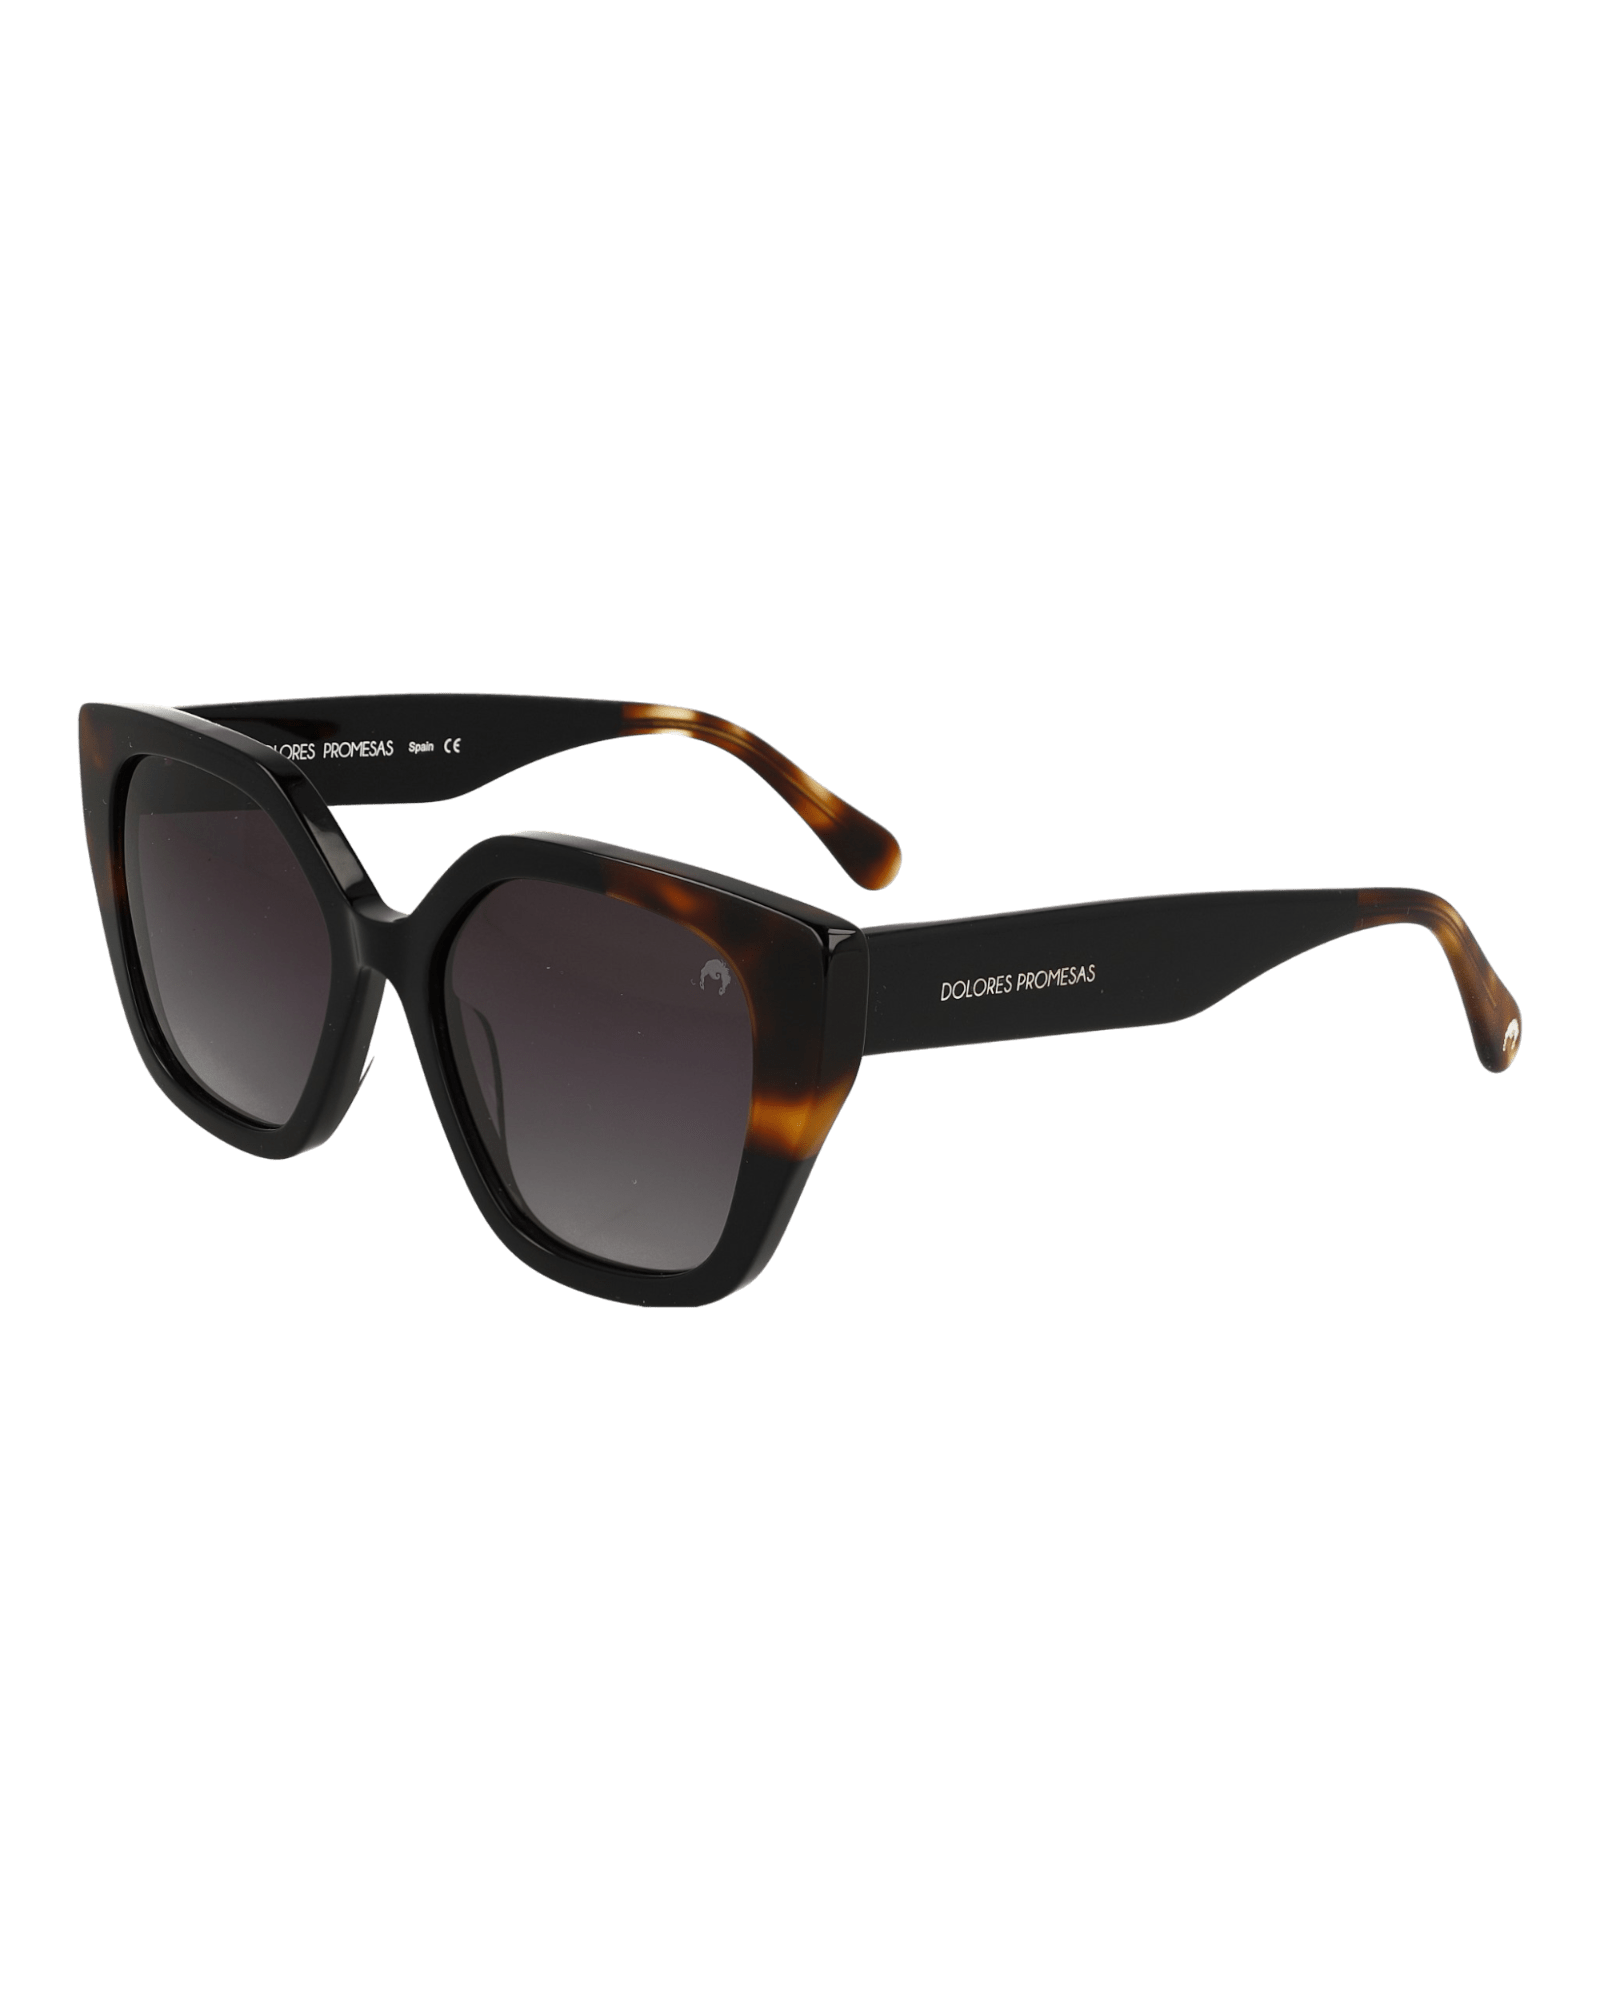 Women’s Black And Havana Beveled Spectacle With Peak Tendency One Size Dolores Promesas